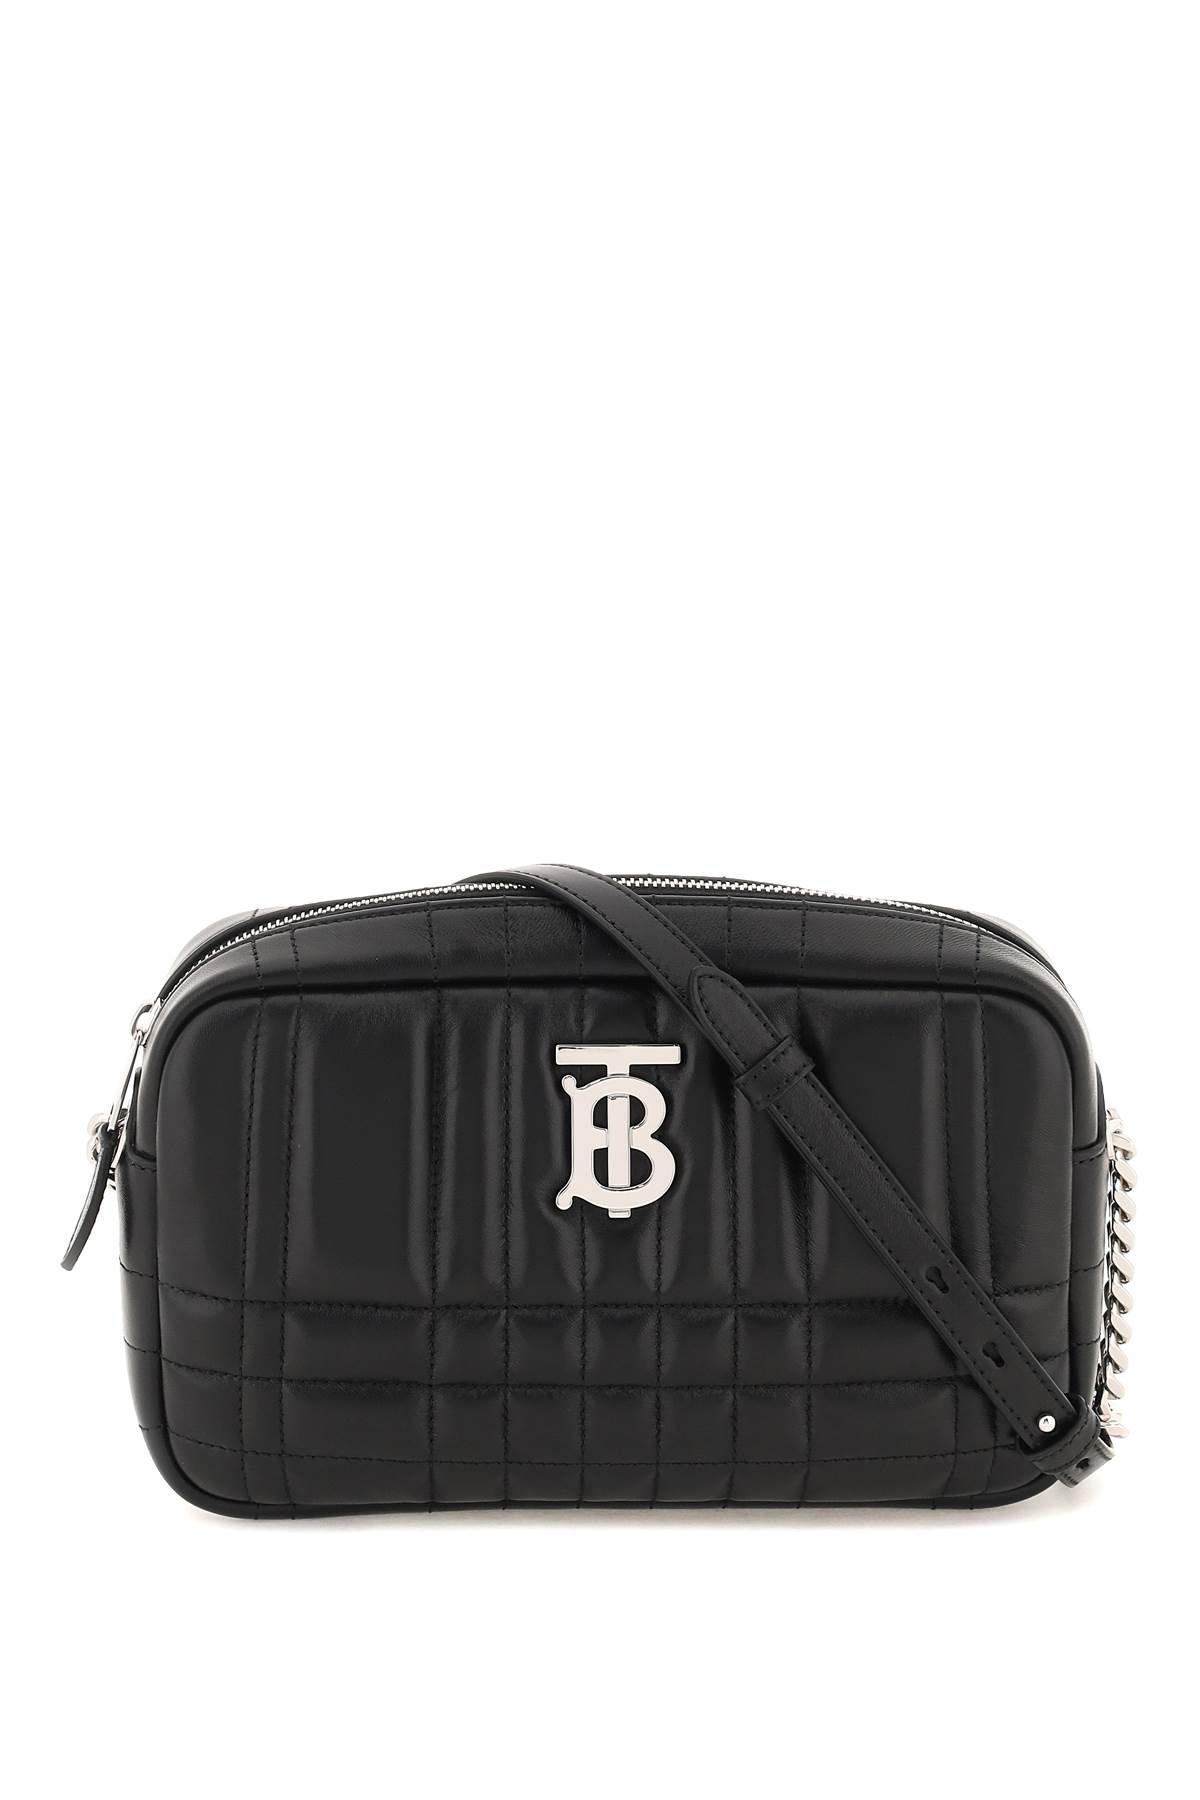 Burberry Quilted Leather Small 'lola' Camera Bag in Black | Lyst